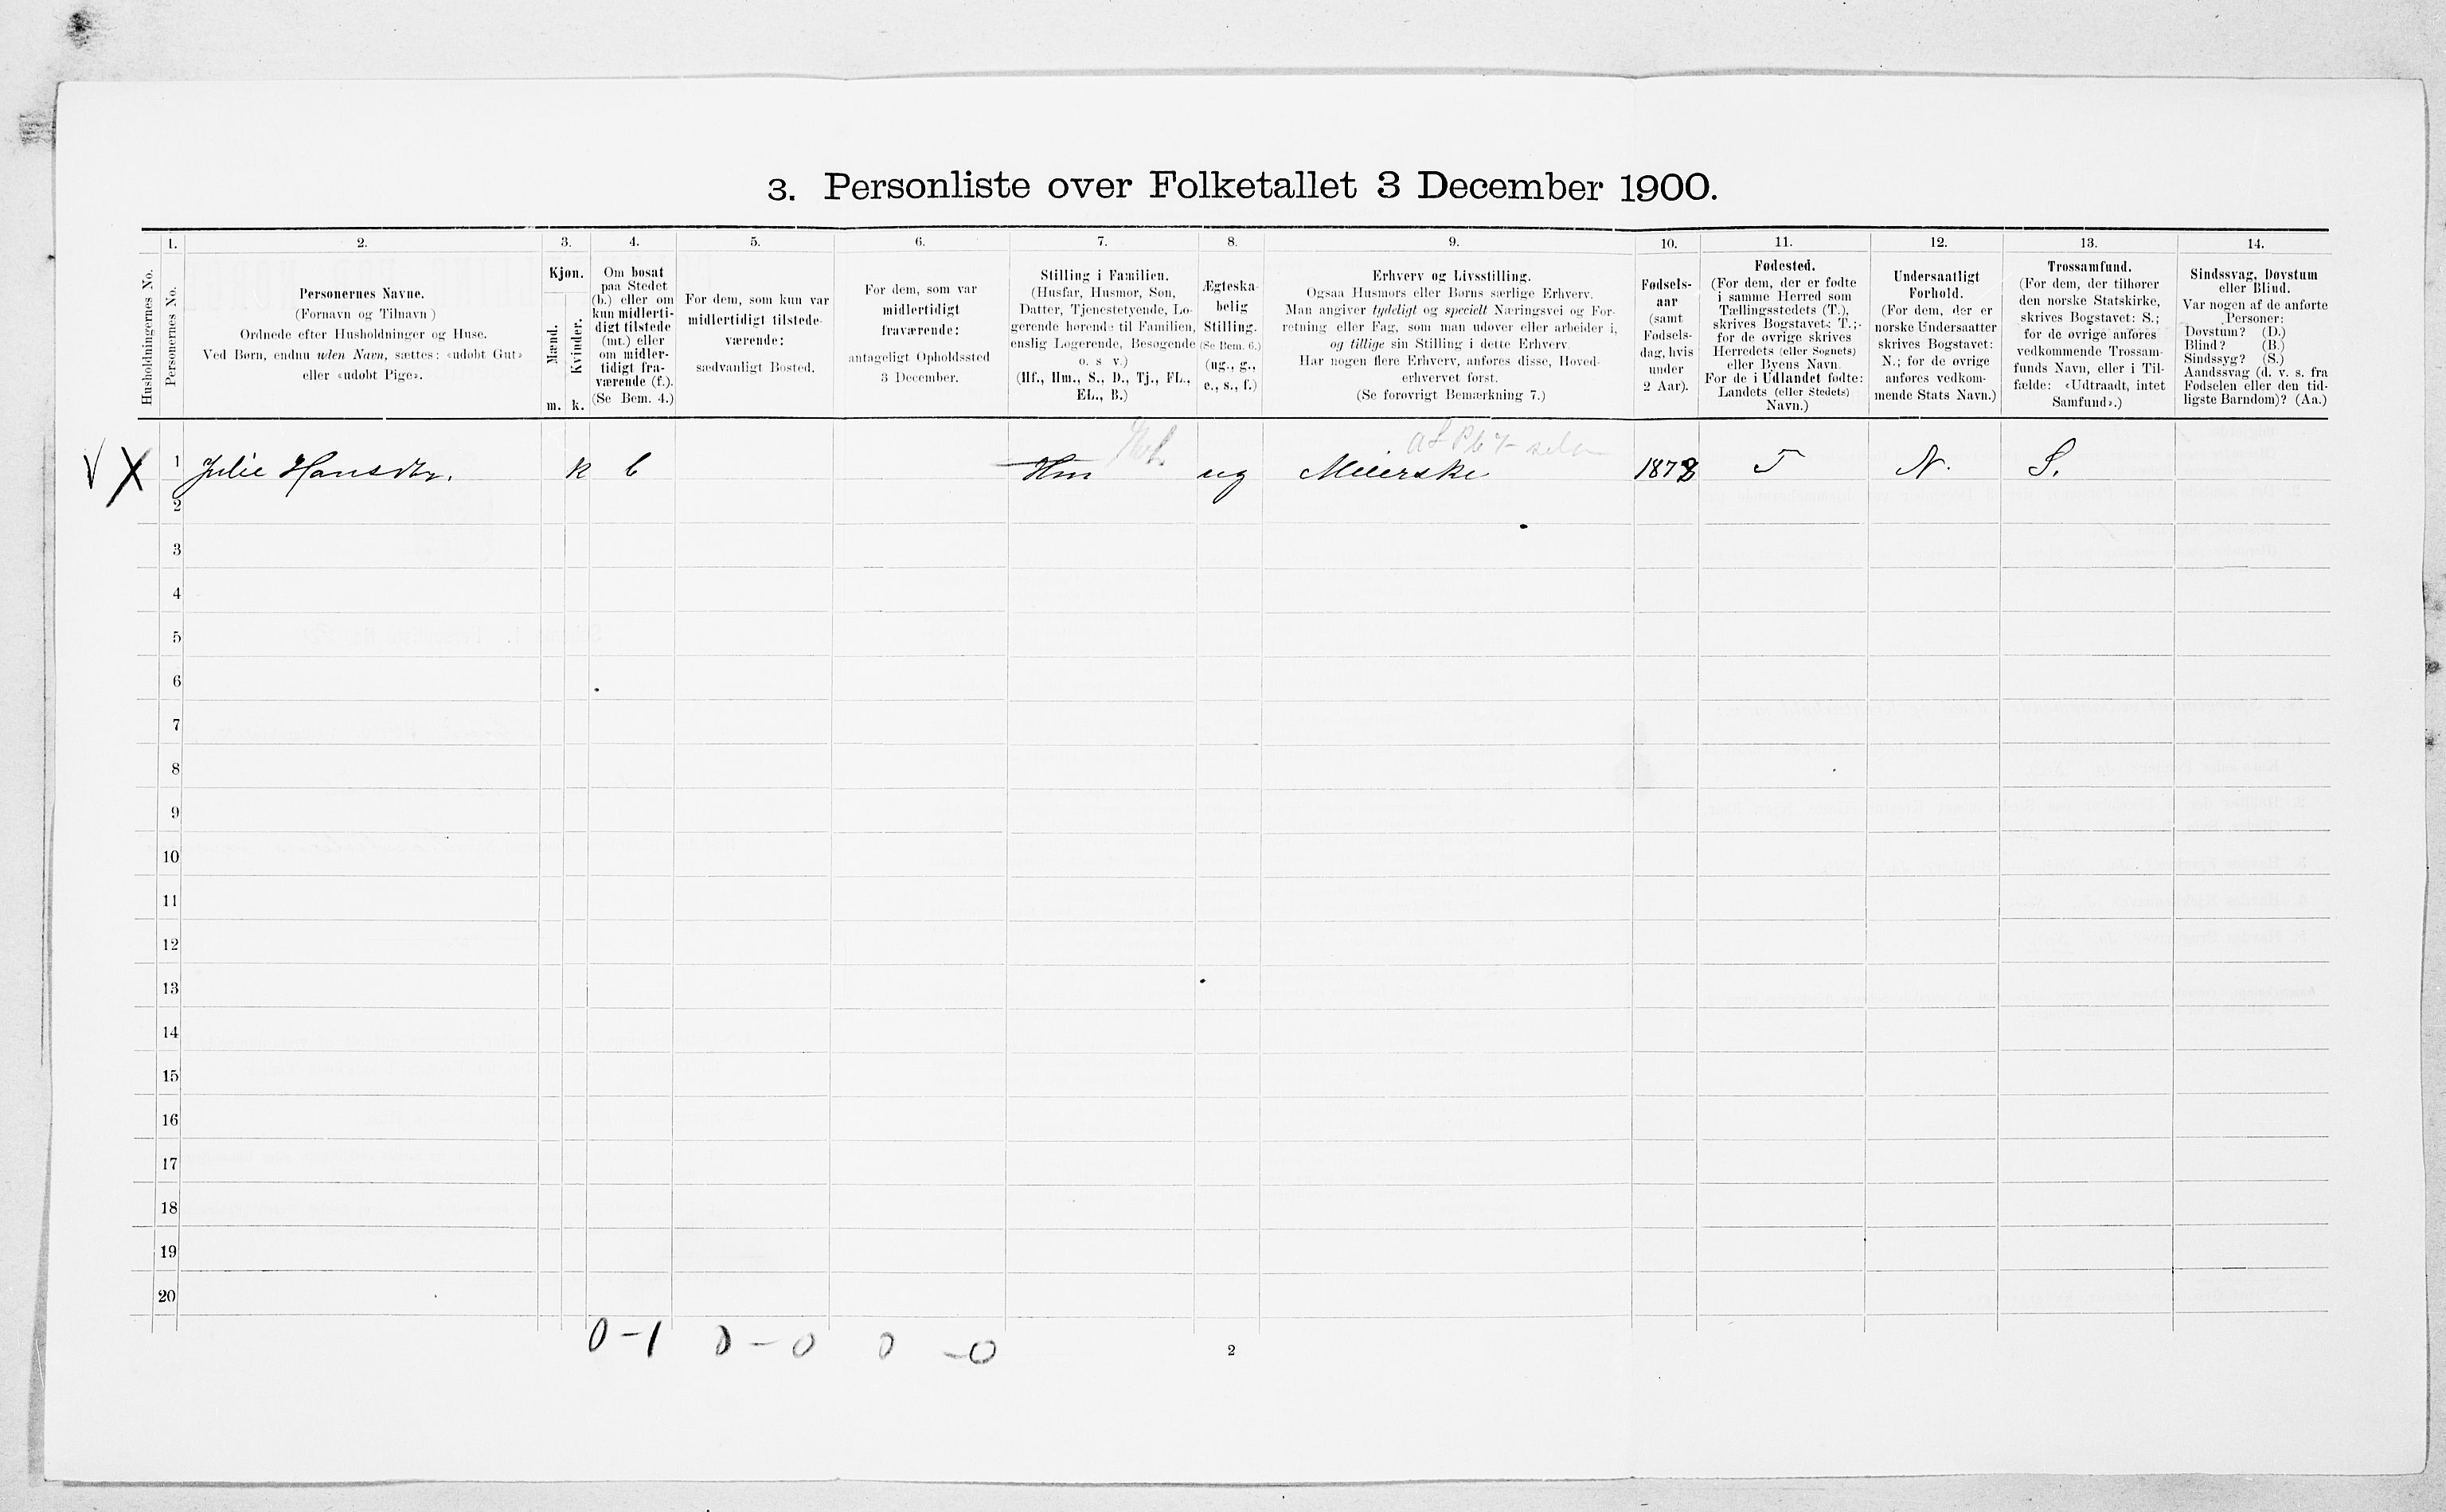 SAT, 1900 census for Bud, 1900, p. 909